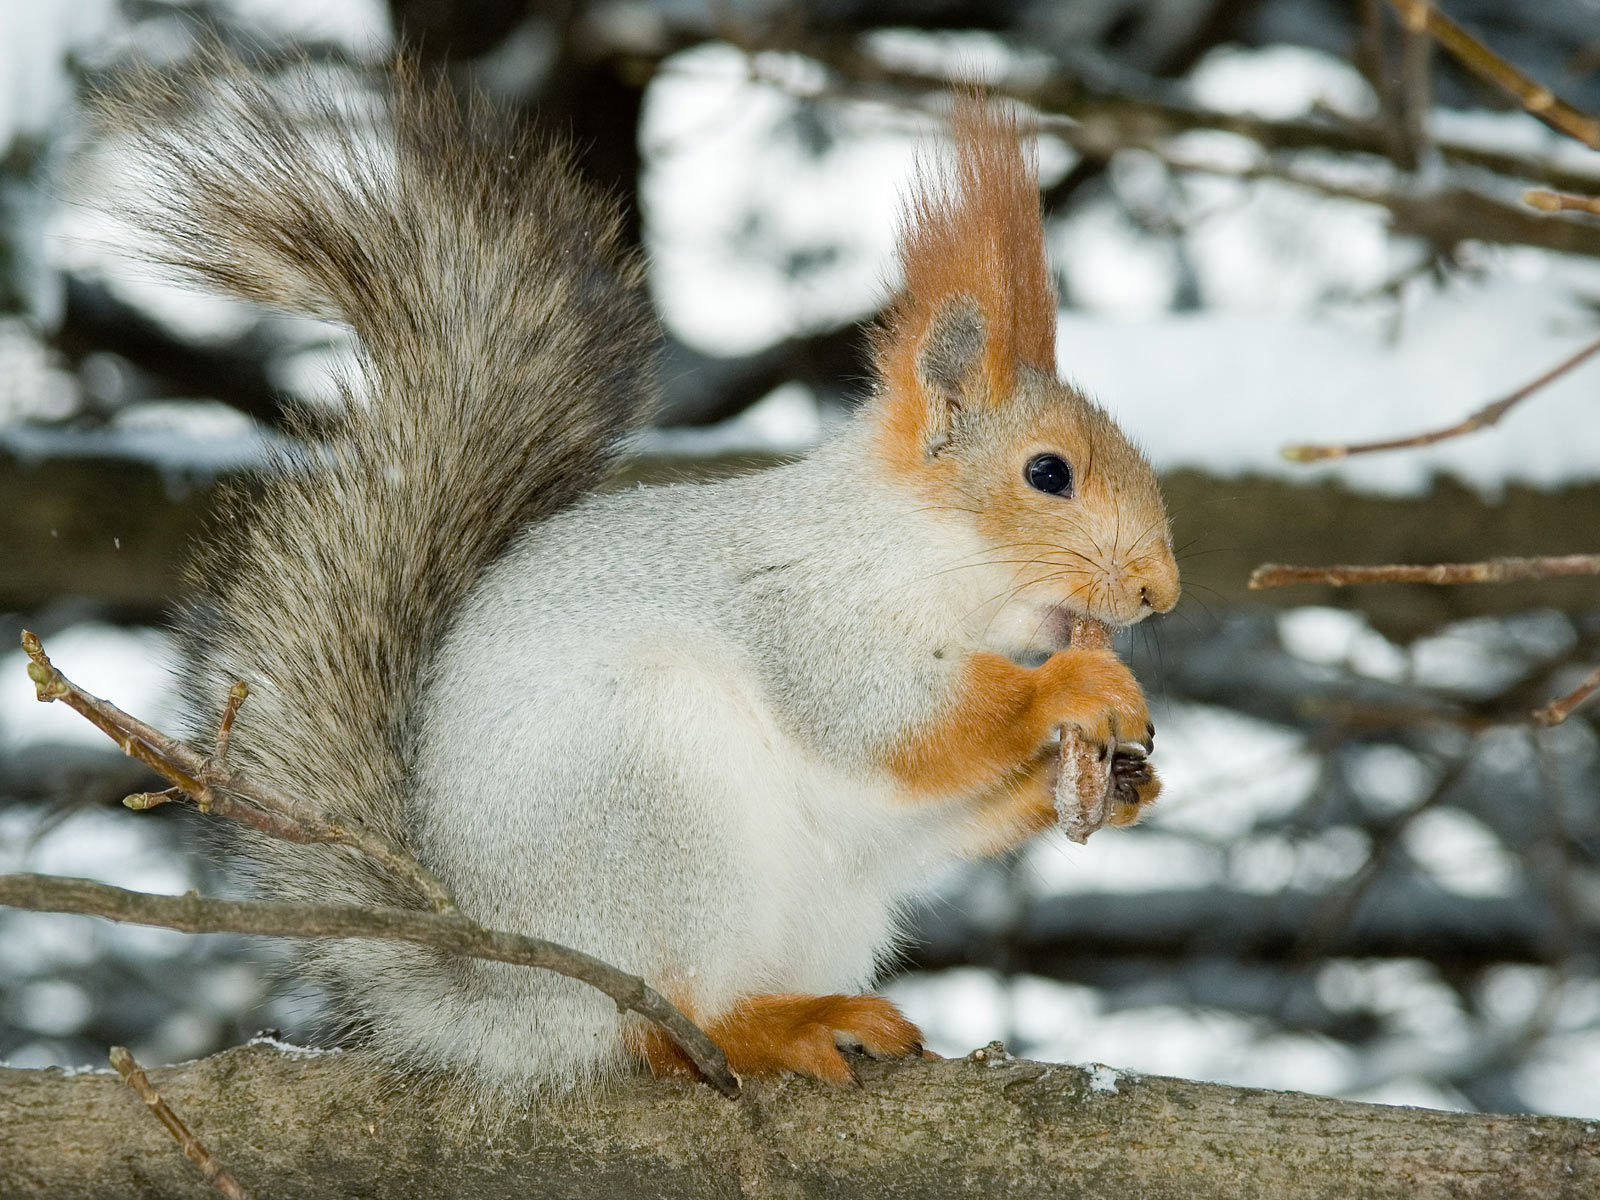 Squirrels With Long Hair On Ears - HD Wallpaper 